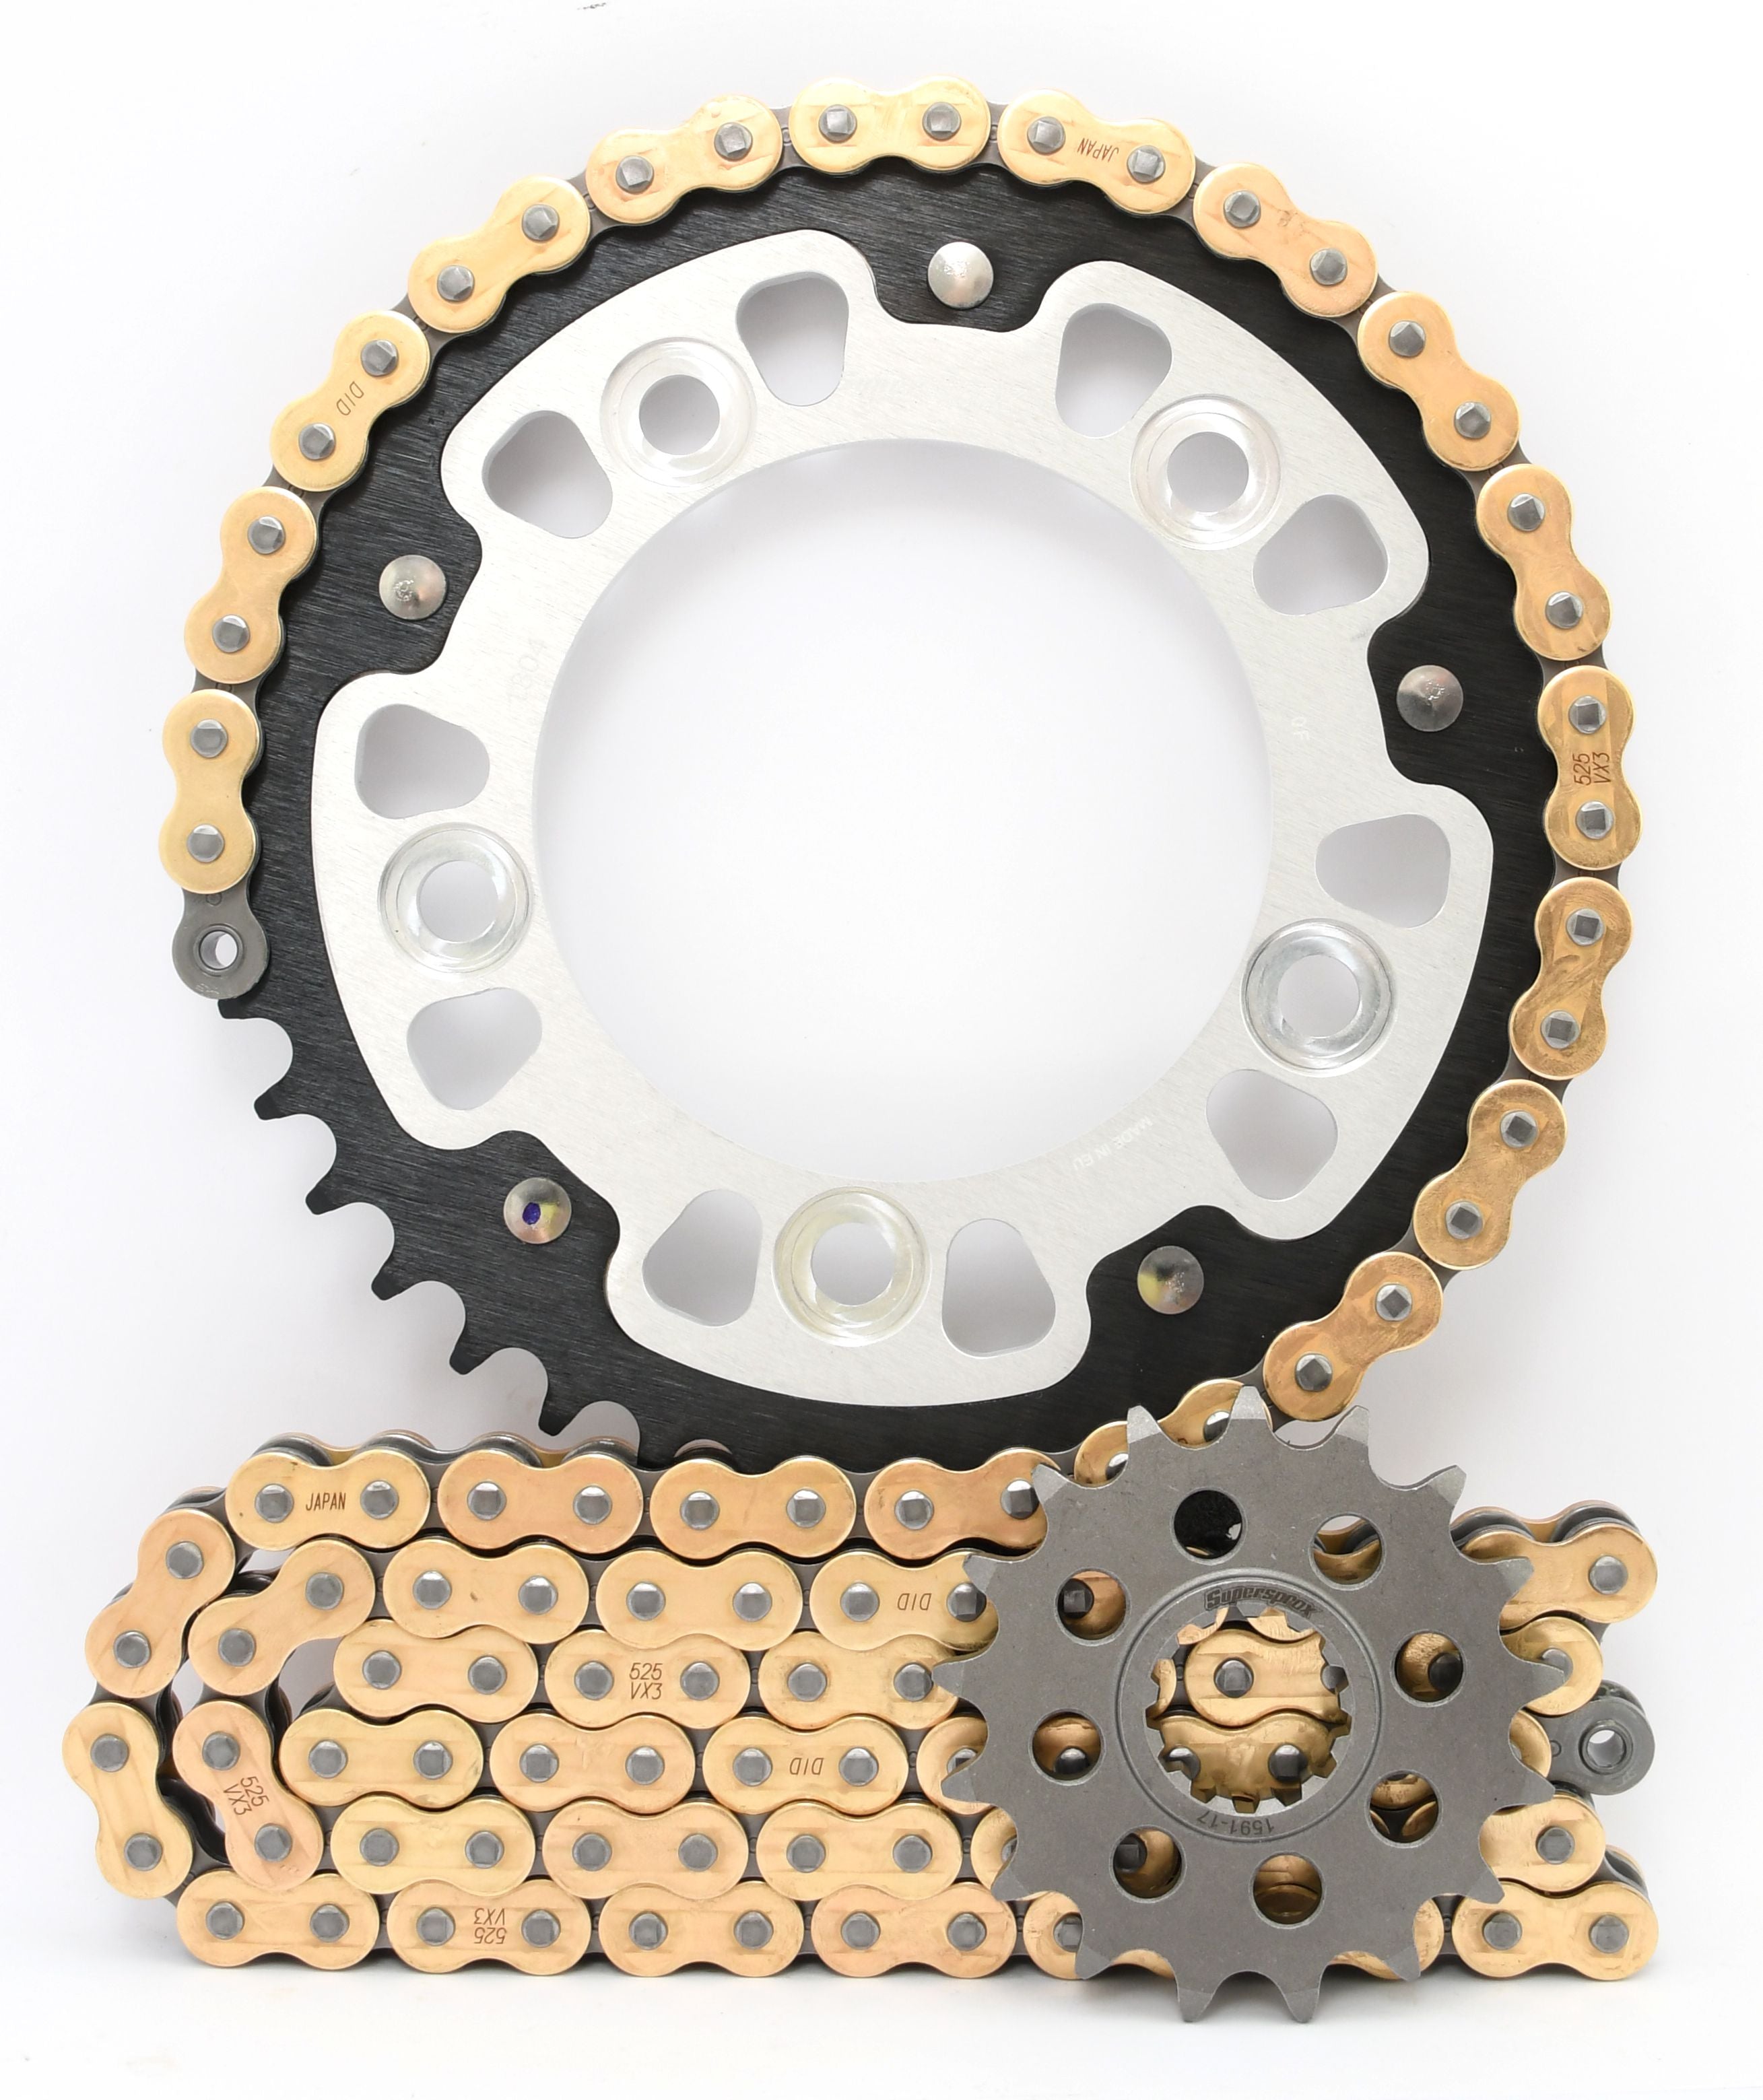 Supersprox Chain & Sprocket Kit for Honda CB 650 F/R 2014> - Standard Gearing